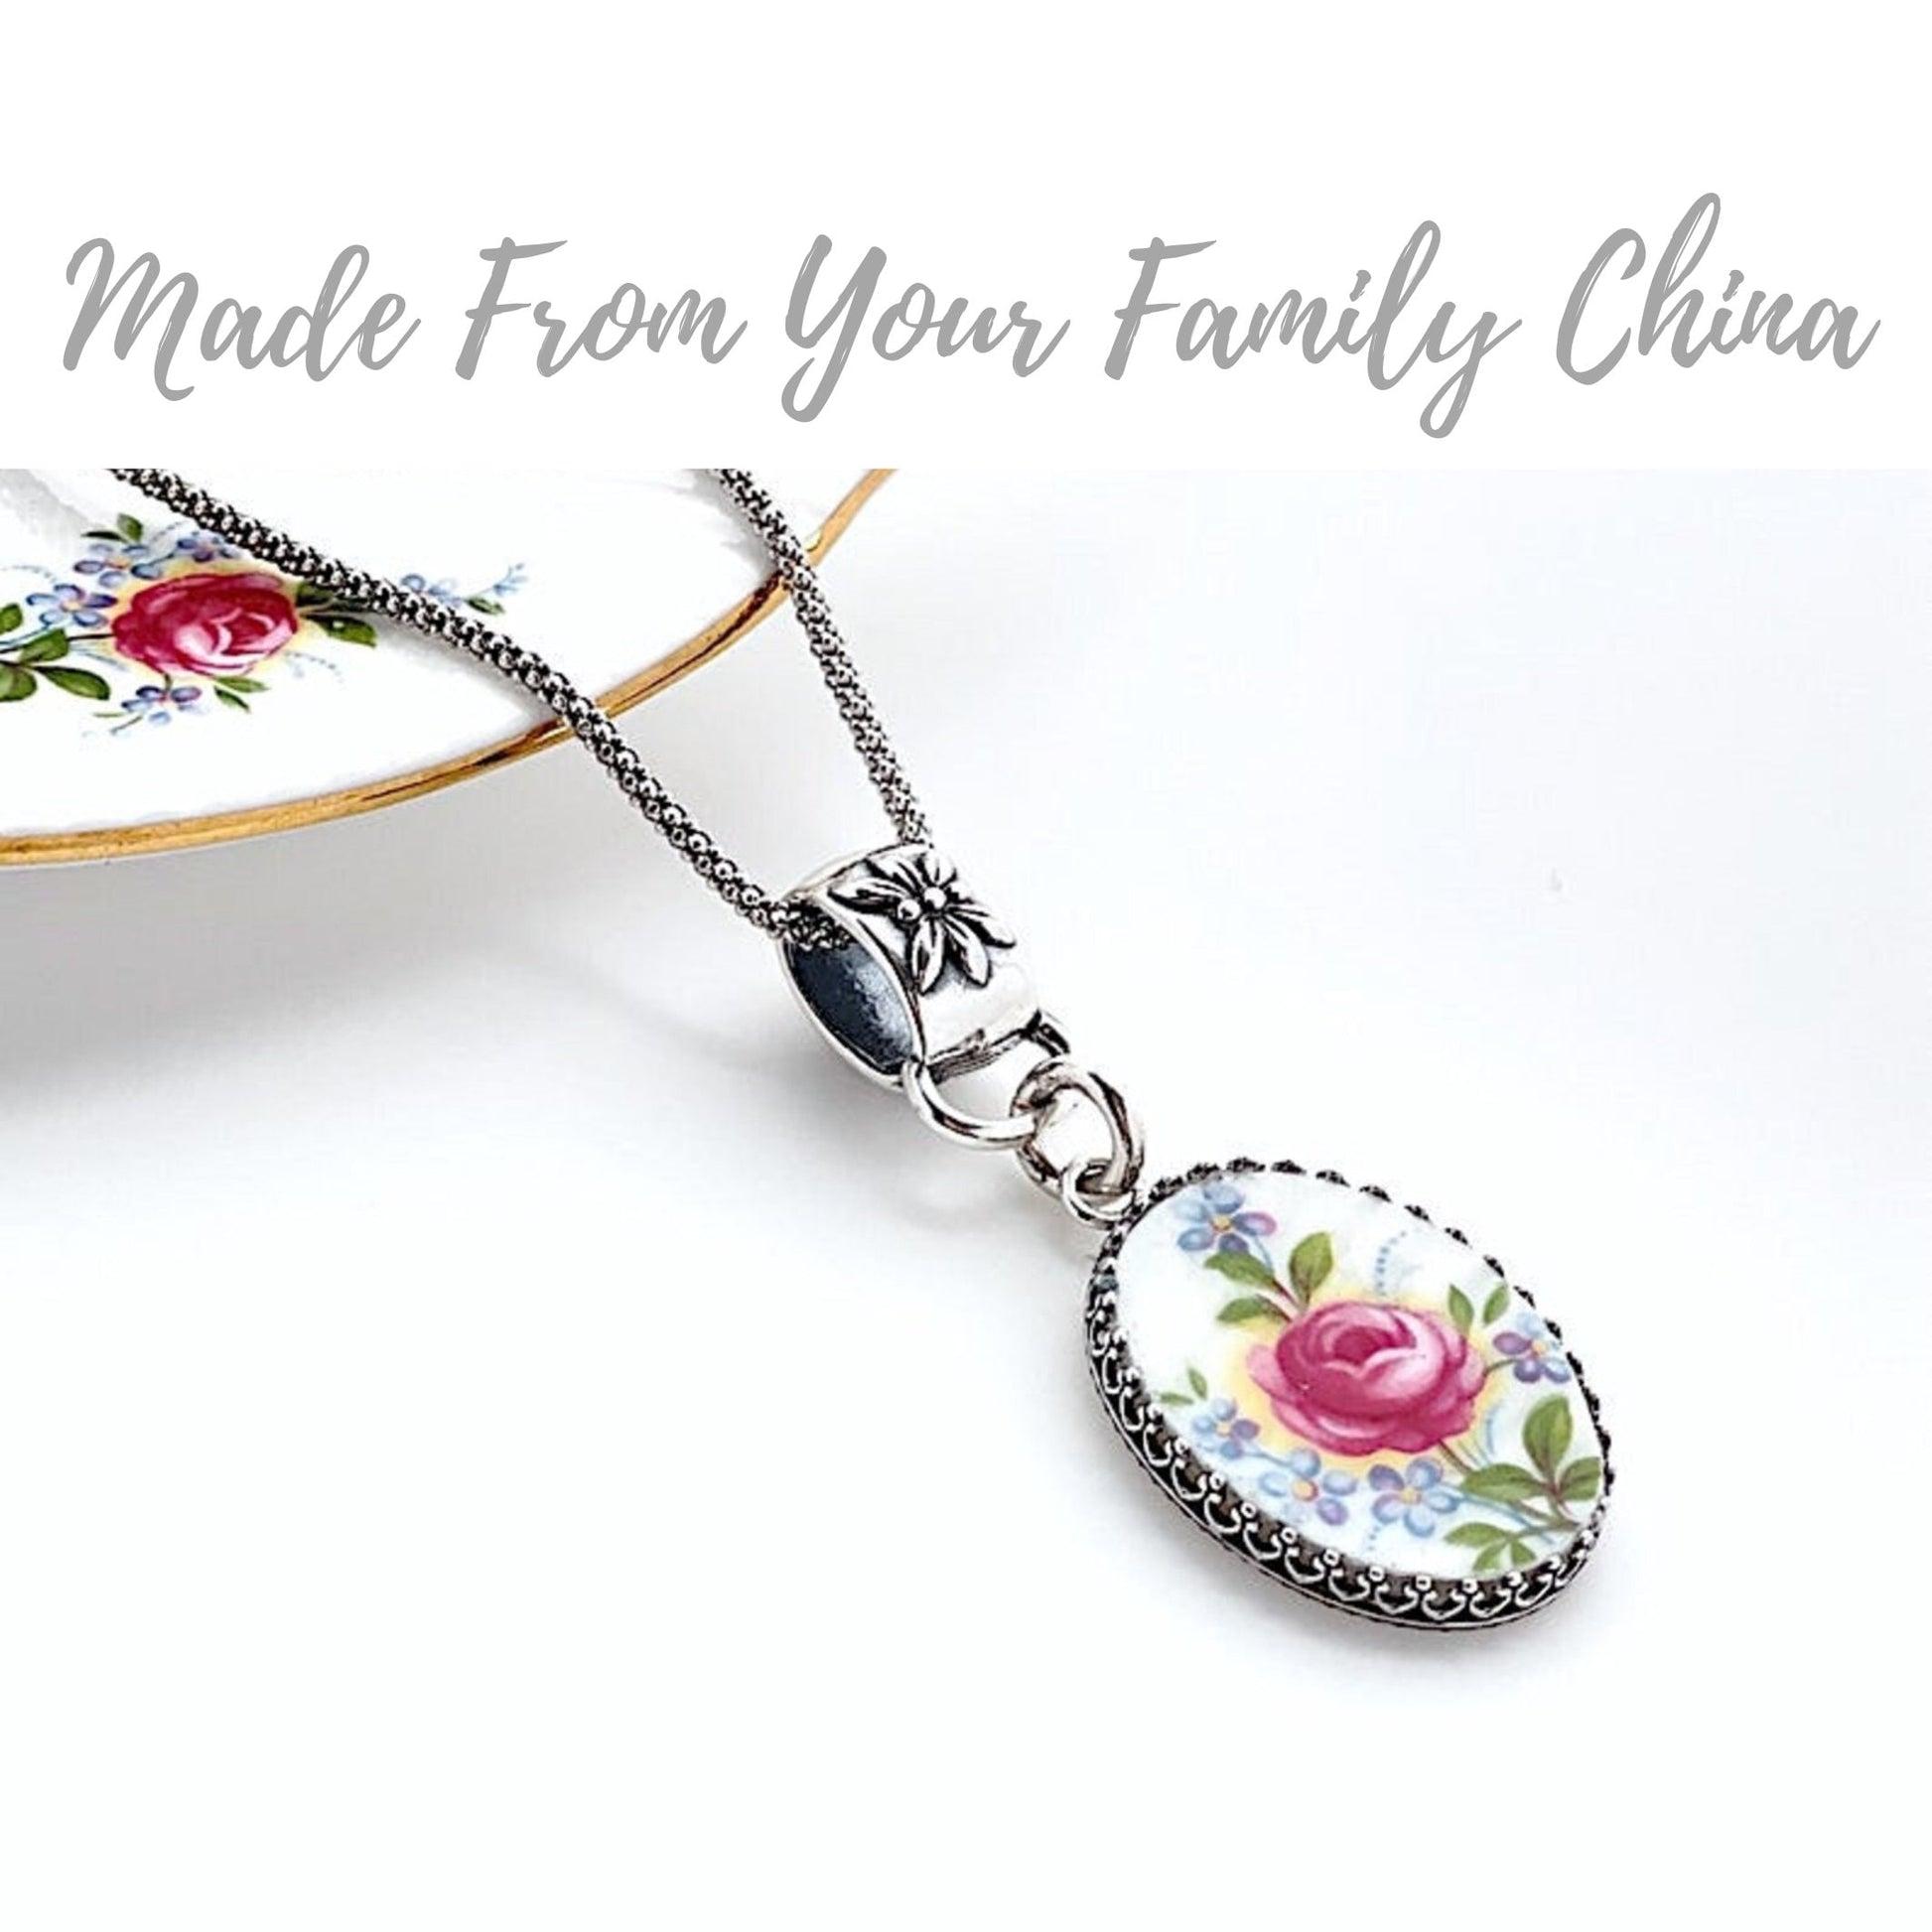 CUSTOM ORDER Medium Oval China Necklace Floral Bale, Memorial Jewelry, Sister Gift, Custom Broken China Jewelry Made from Your China